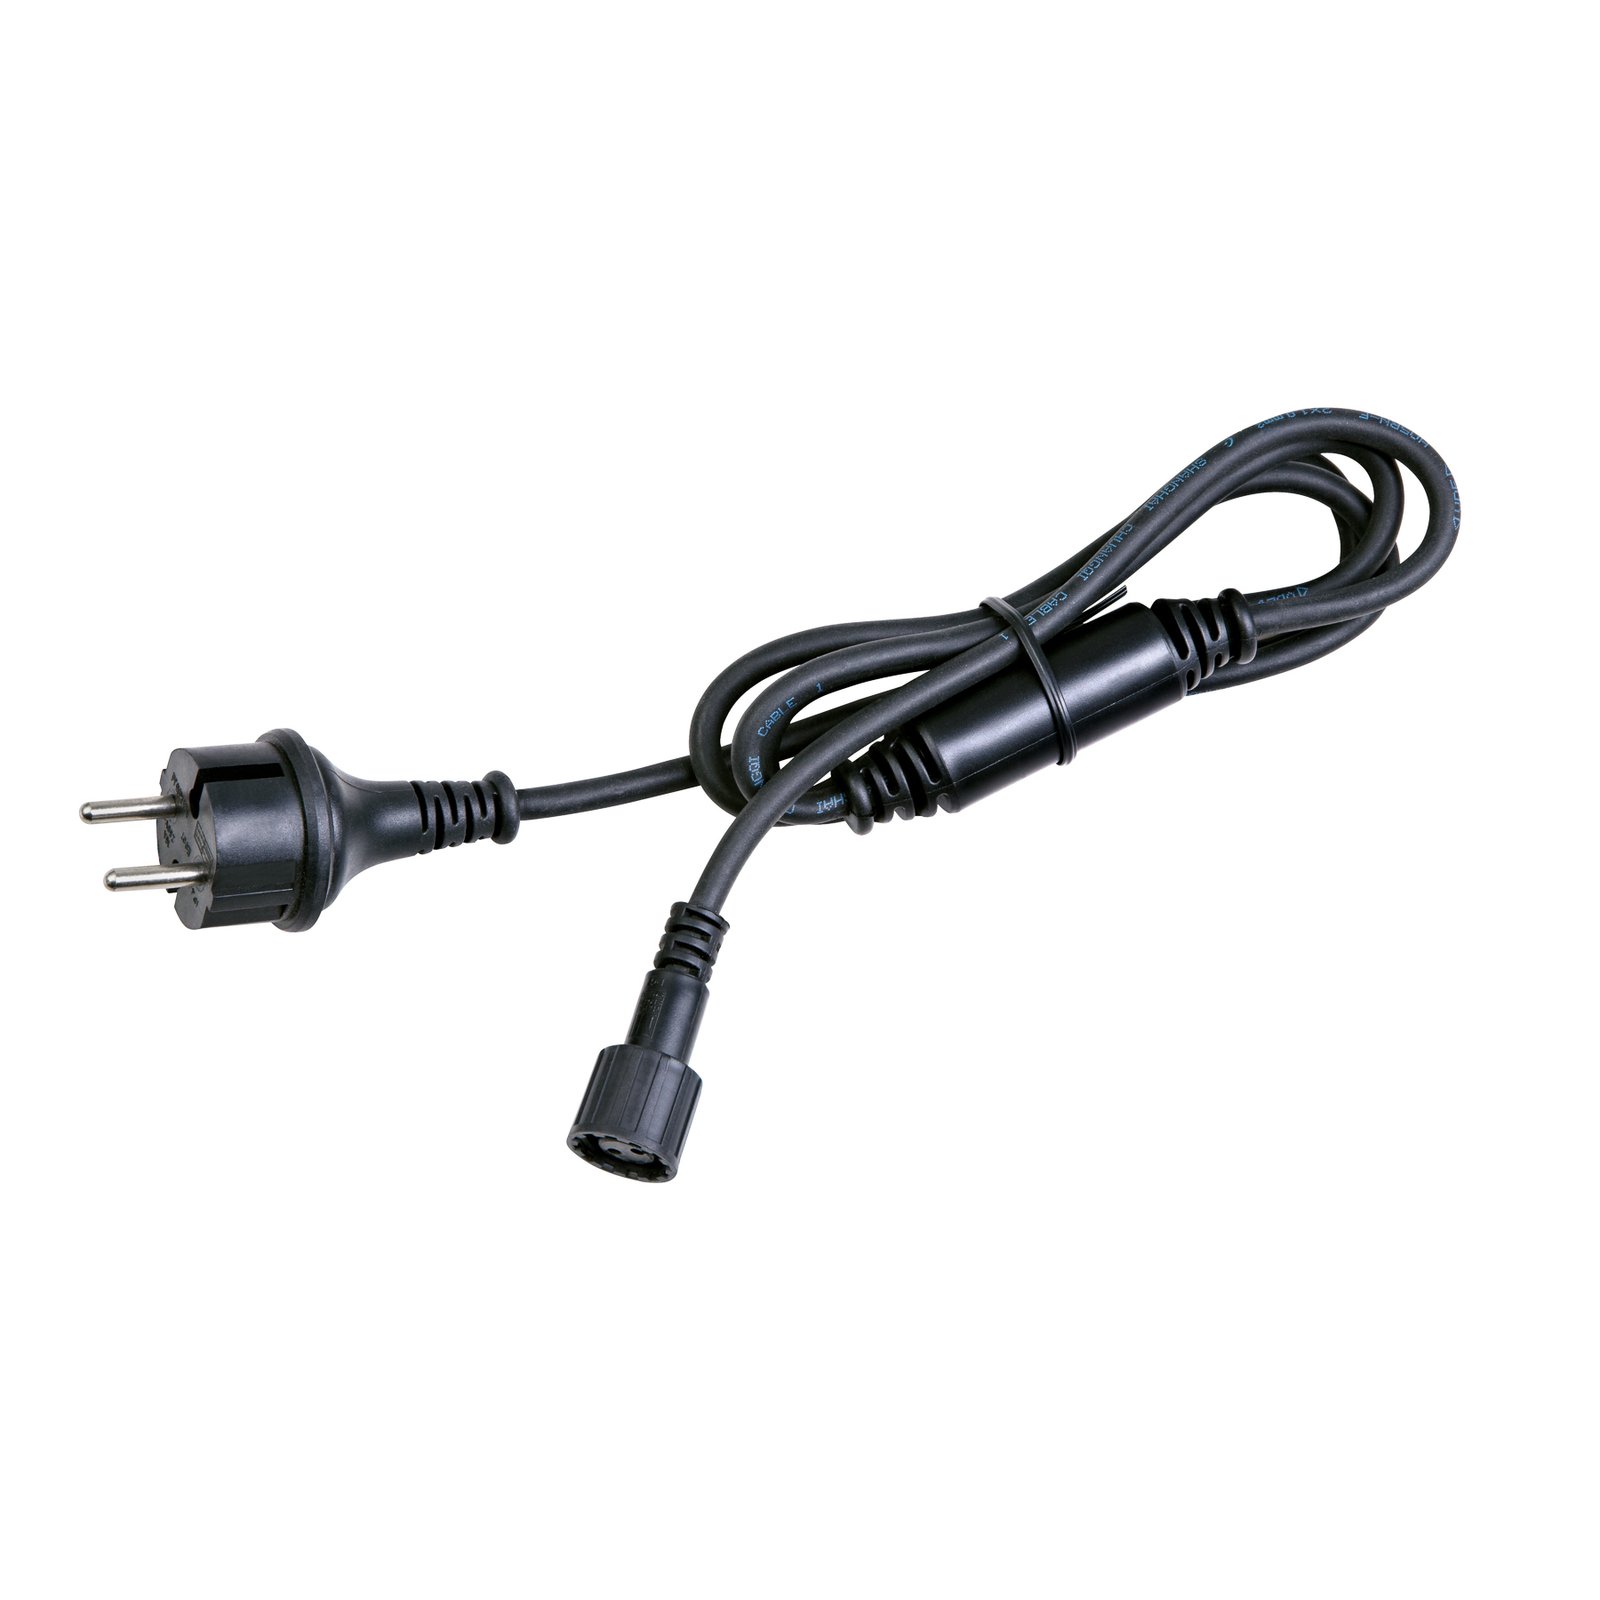 Start cable 1.5 m with plug for Chrissline